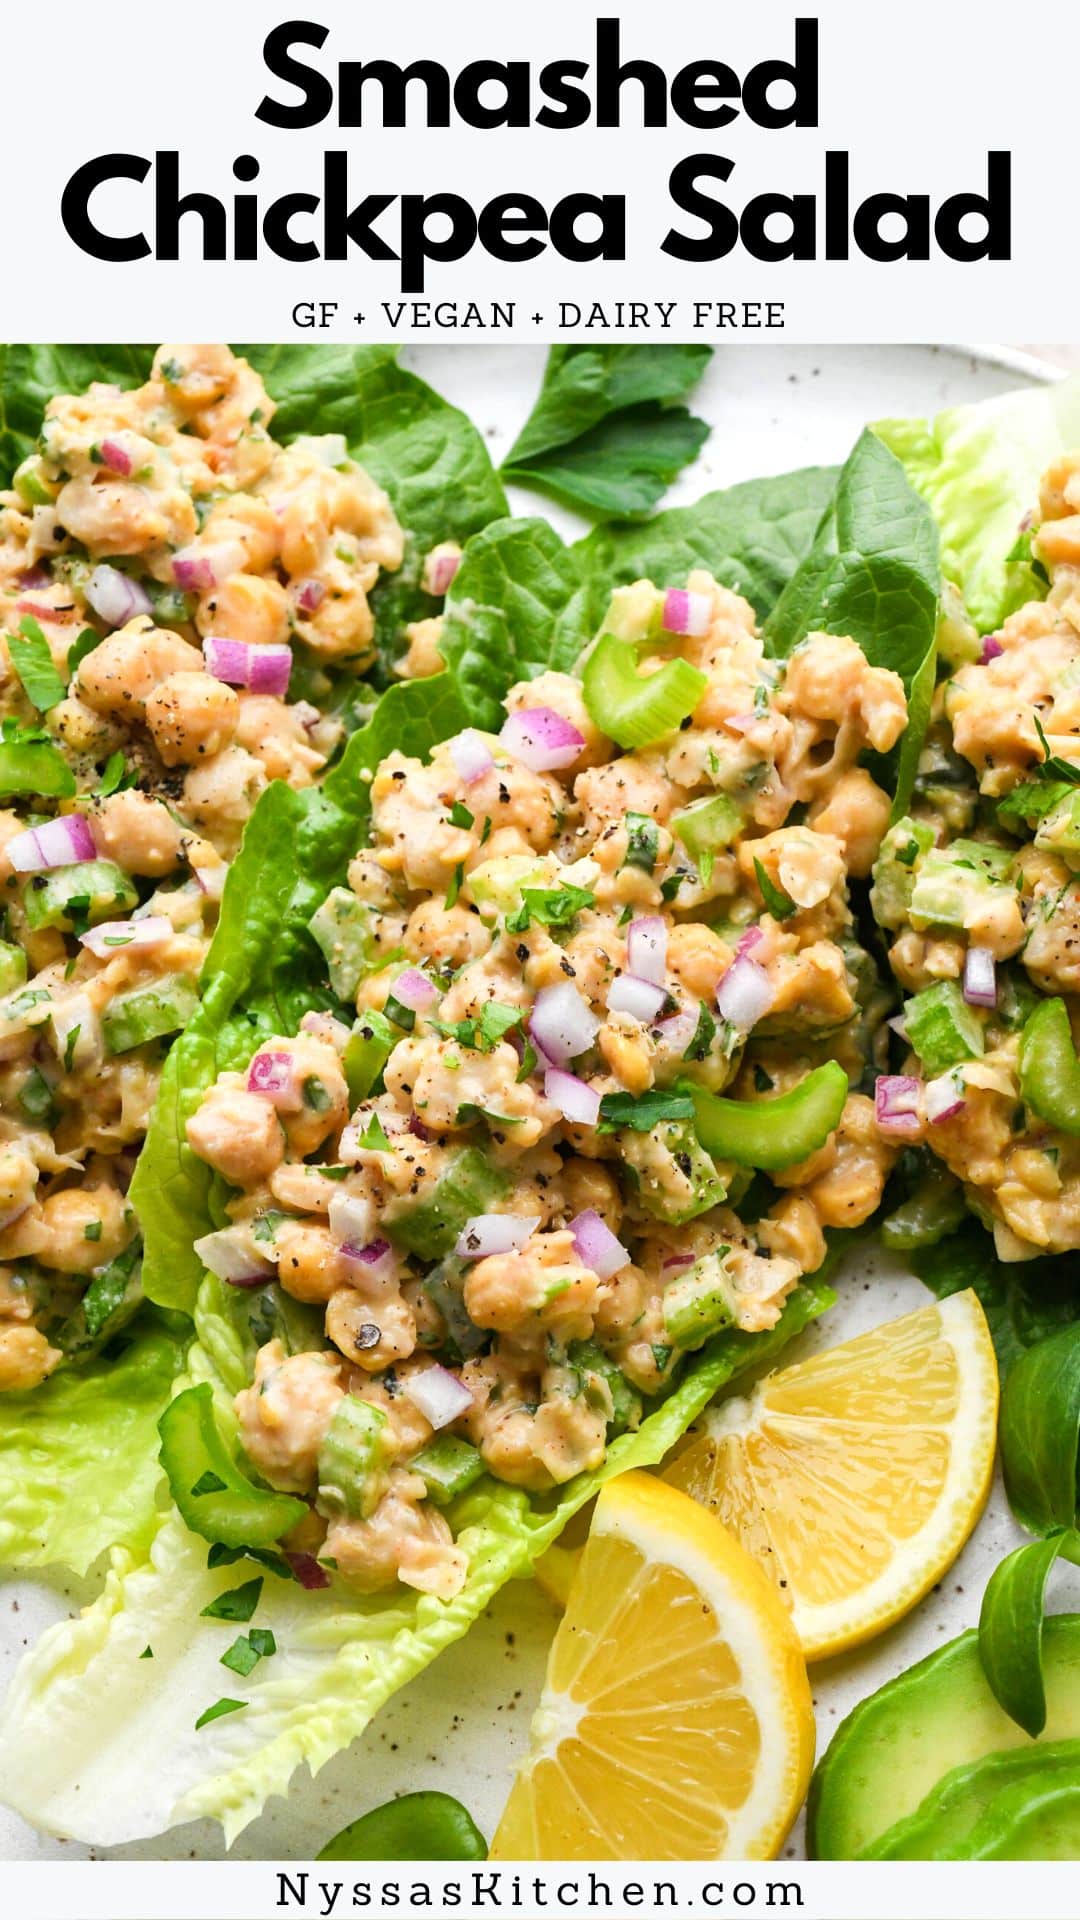 Smashed chickpea salad is the perfect healthy-in-a-hurry recipe for lunch, dinner, or meal prep. Made with all the traditional flavors of a classic tuna salad, but with chickpeas instead of tuna! Delicious on it's own, in lettuce wraps, or for a sandwich. So versatile and ready in less than 20 minutes! Vegan / vegetarian, gluten free, dairy free, nut free, and soy free.